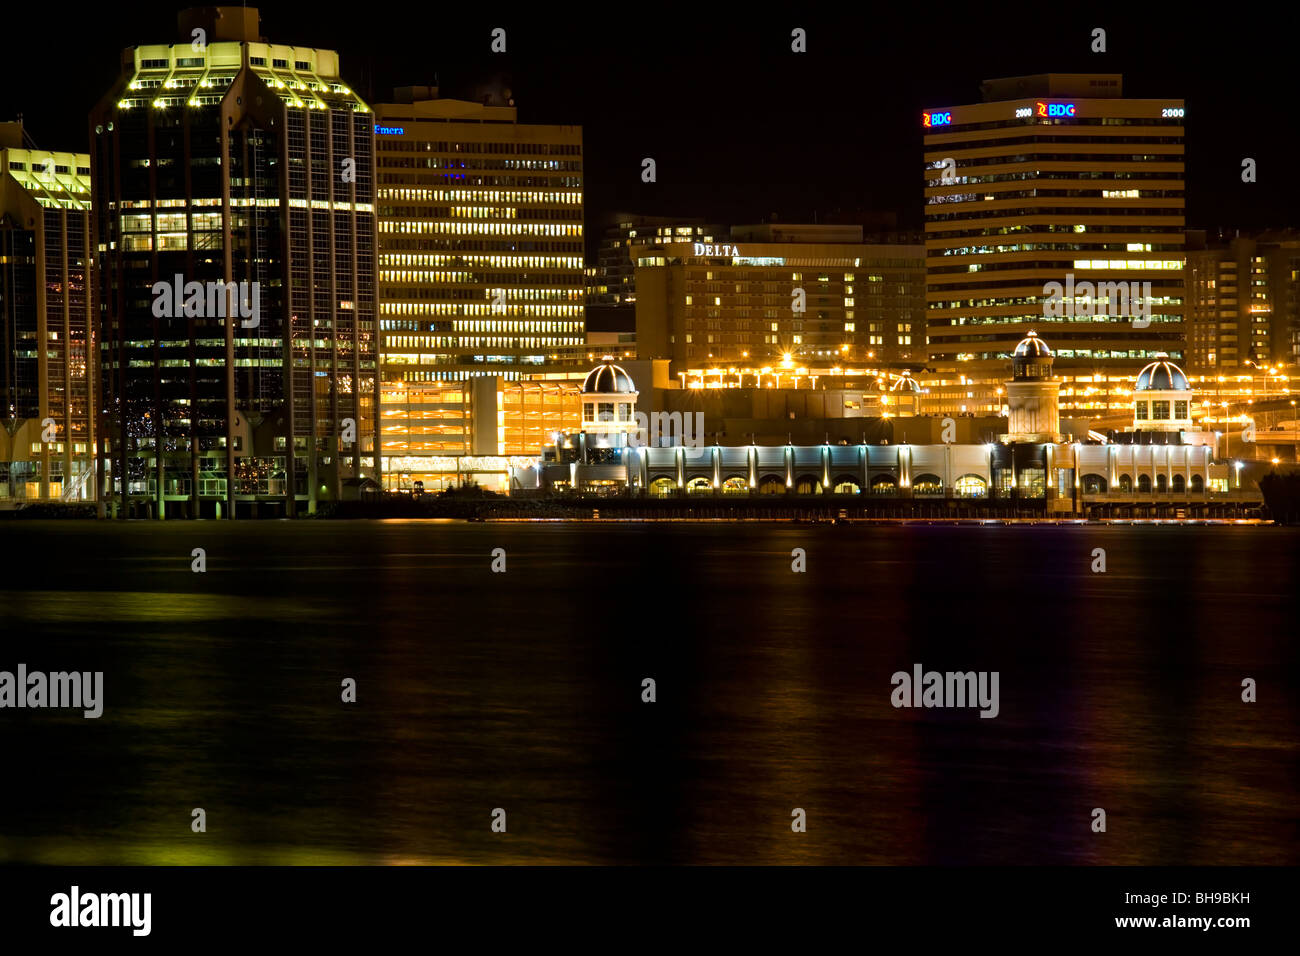 Night time view of the Halifax, Nova Scotia waterfront as viewed from the Dartmouth side. Stock Photo